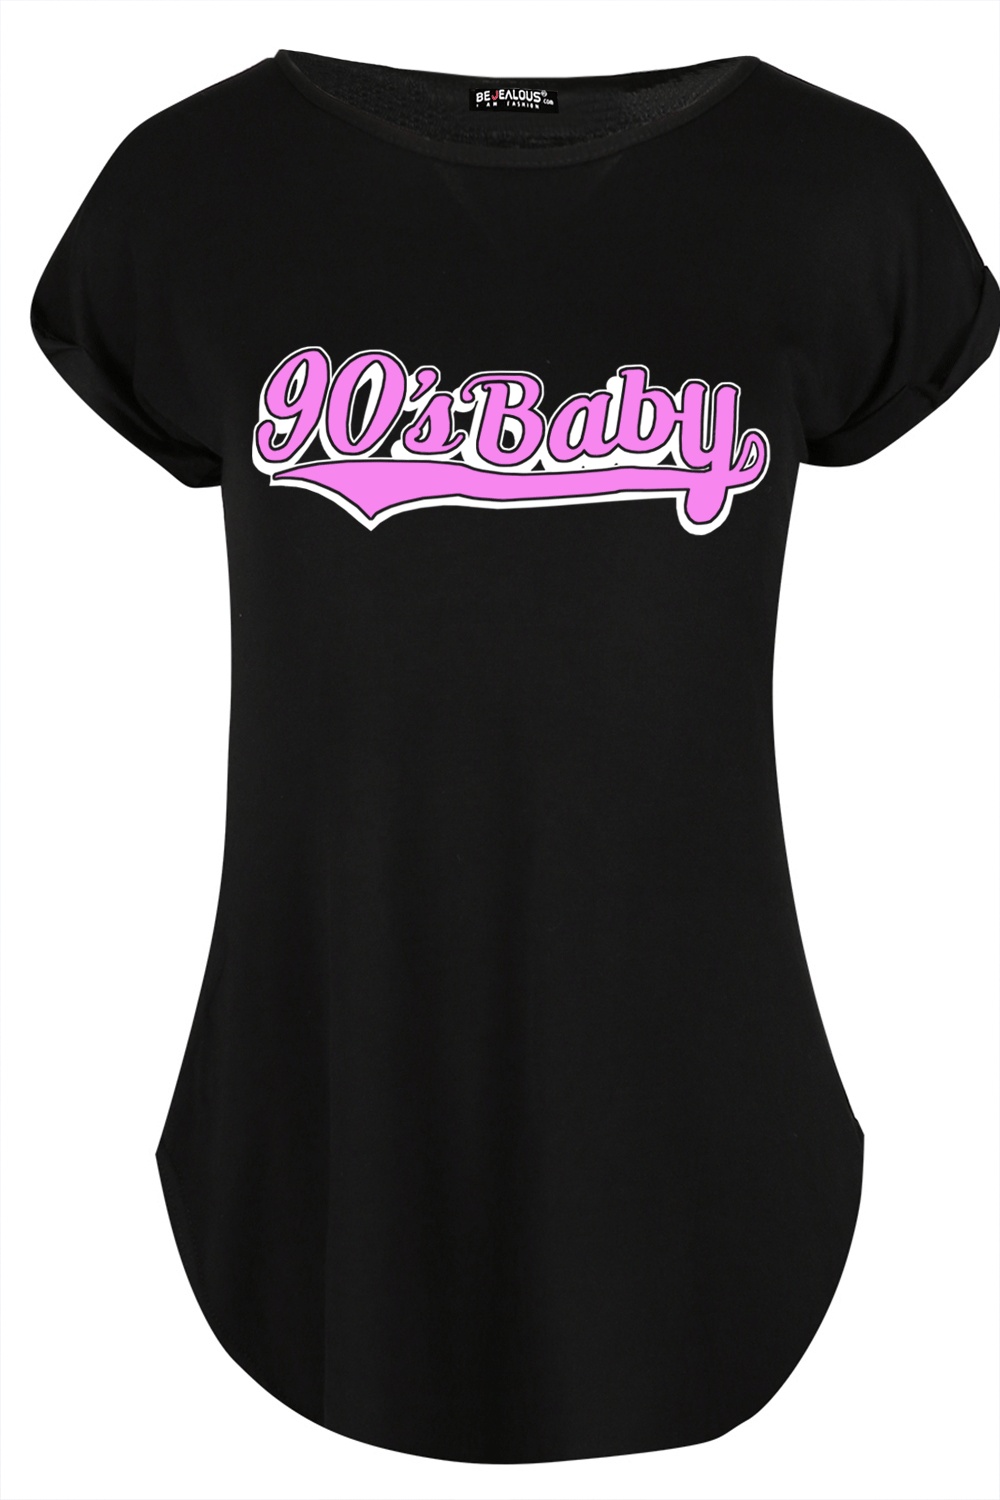 Lily 90s Baby Printed Curved Hem Turn Up T Shirt